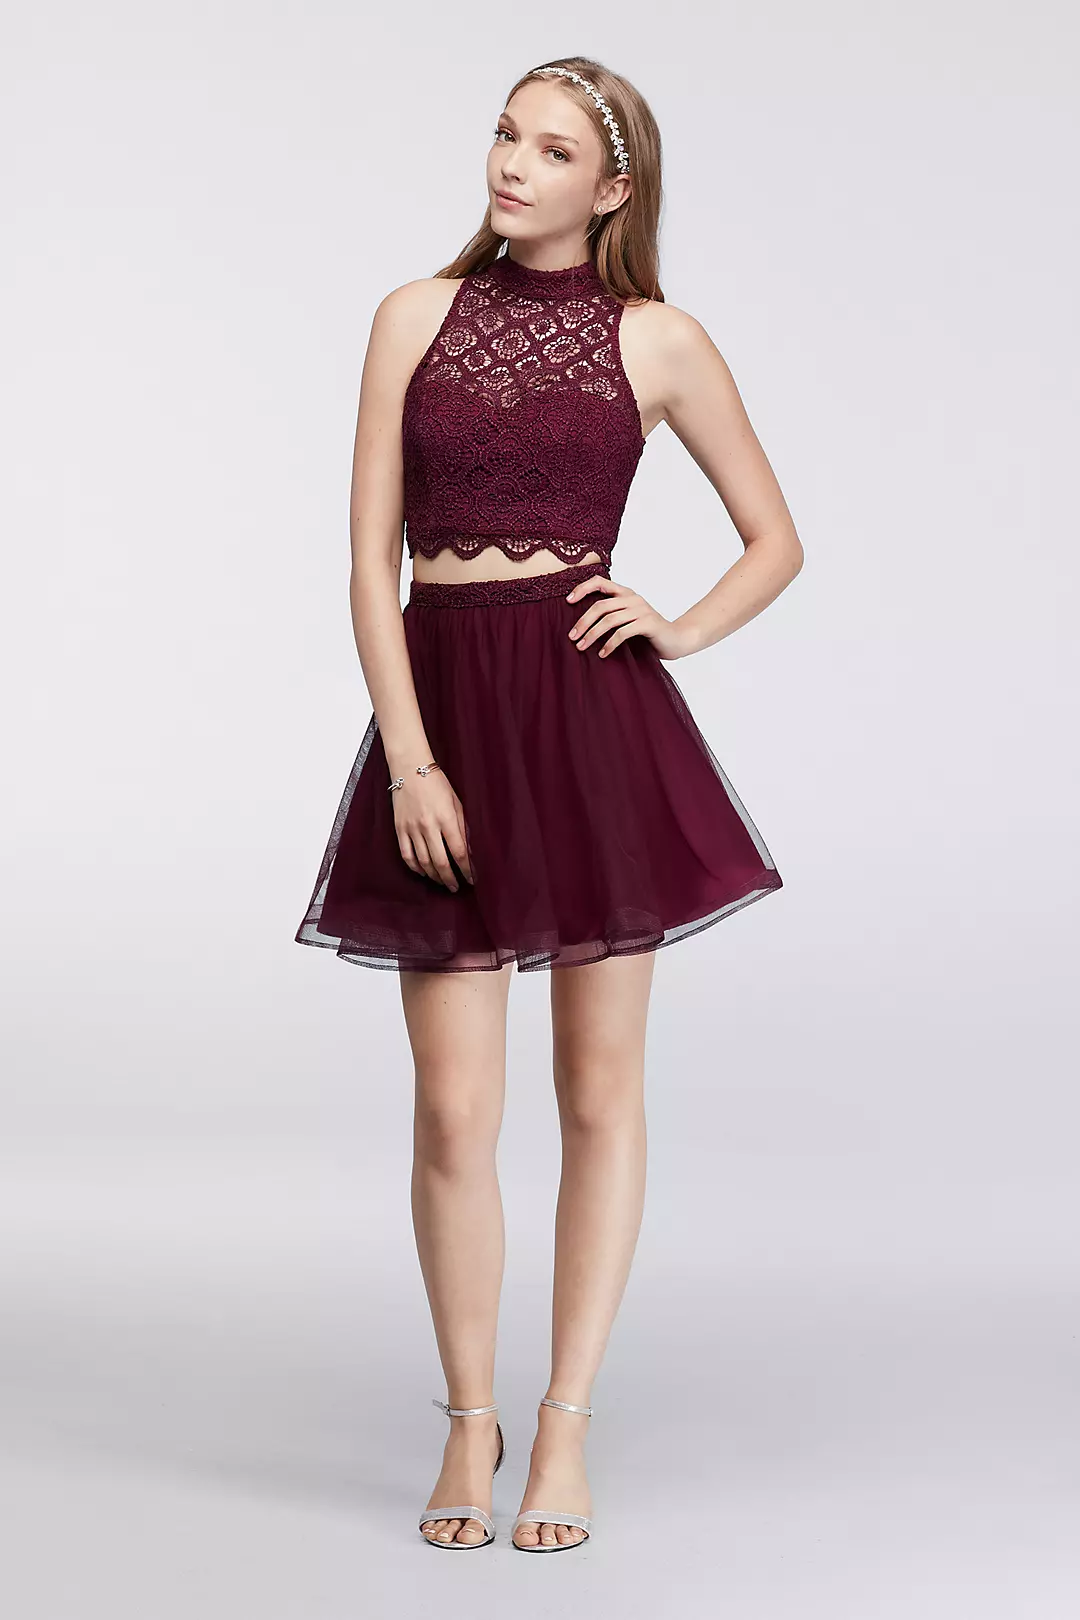 Mock Neck Illusion Lace Crop Top and Mesh Skirt Image